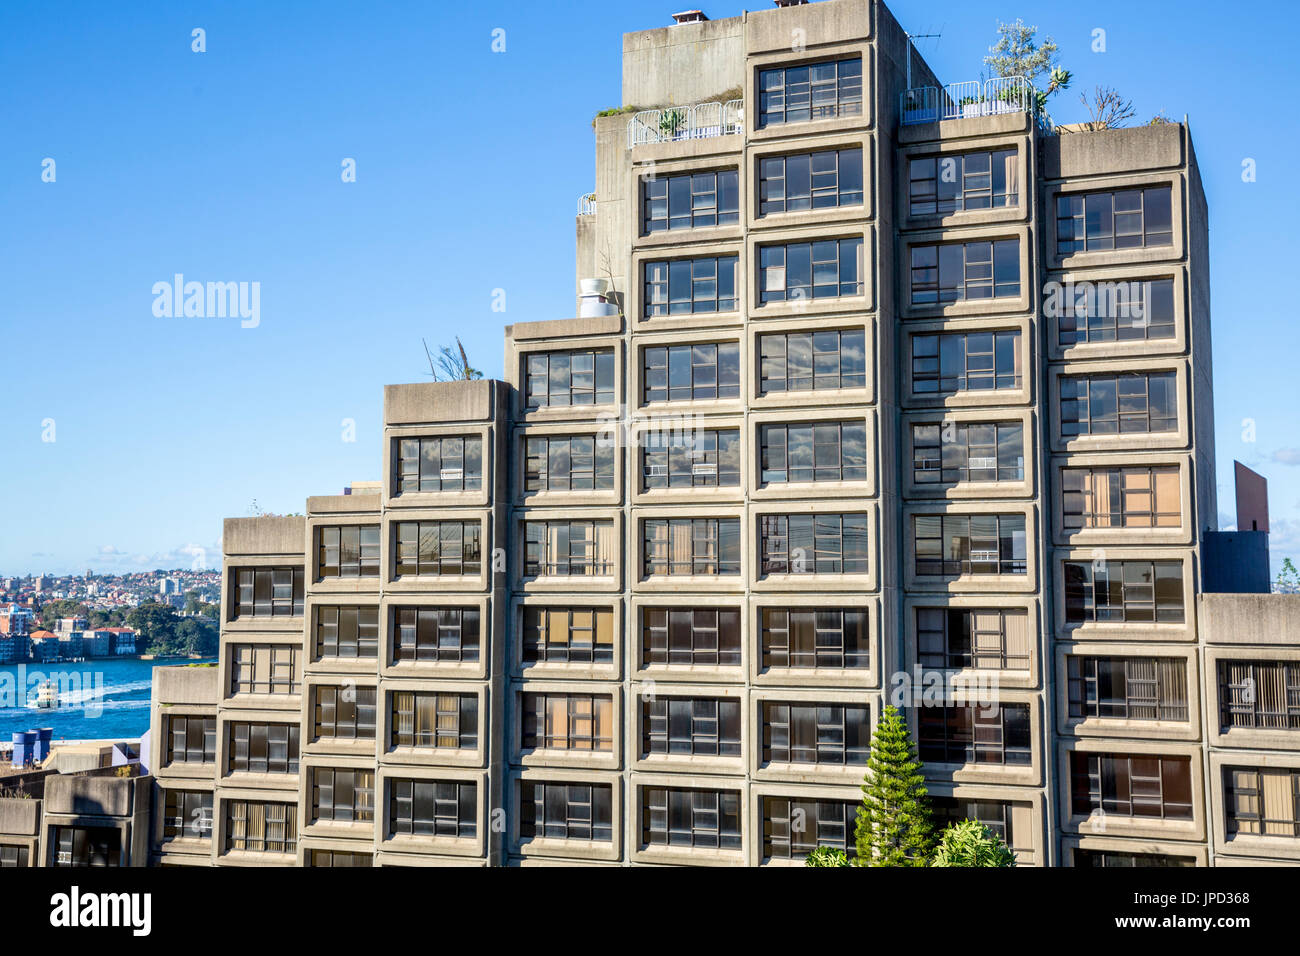 Sirius public housing building in the Rocks area of Sydney city centre,new south wales,Australia Stock Photo